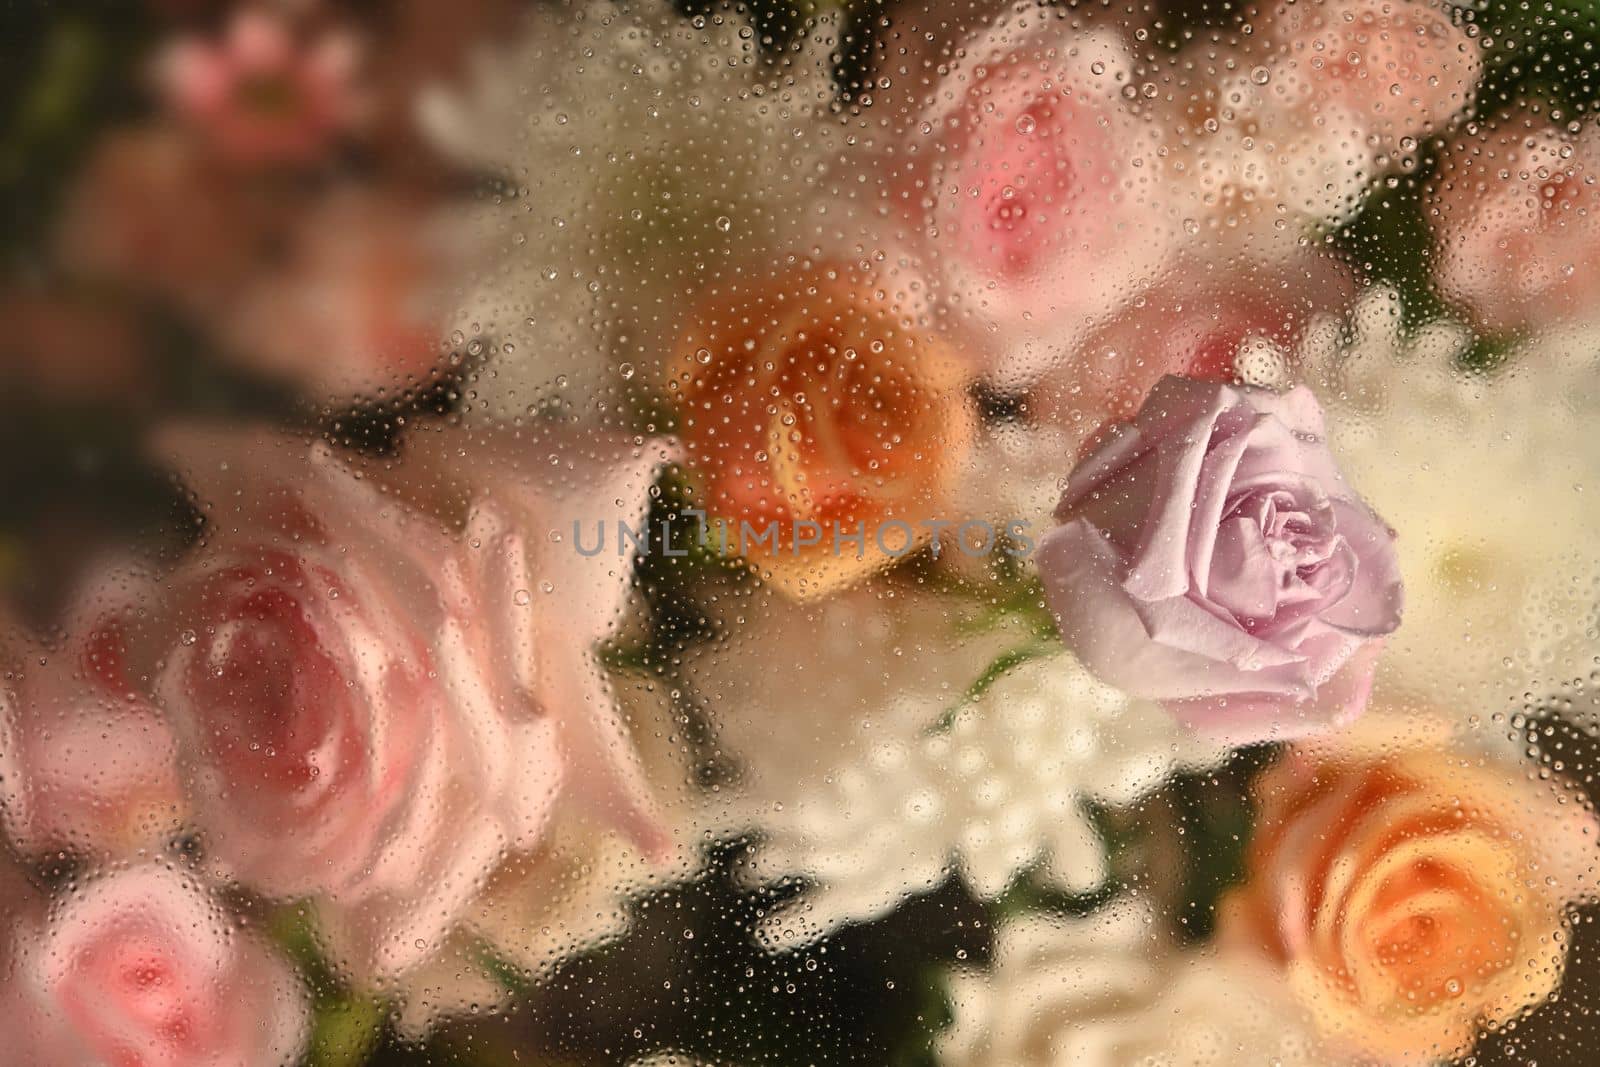 Cold foggy glass with beautiful pink roses and white chrysanthemums inside with dripping water drops, for floral botanical wallpaper by prathanchorruangsak